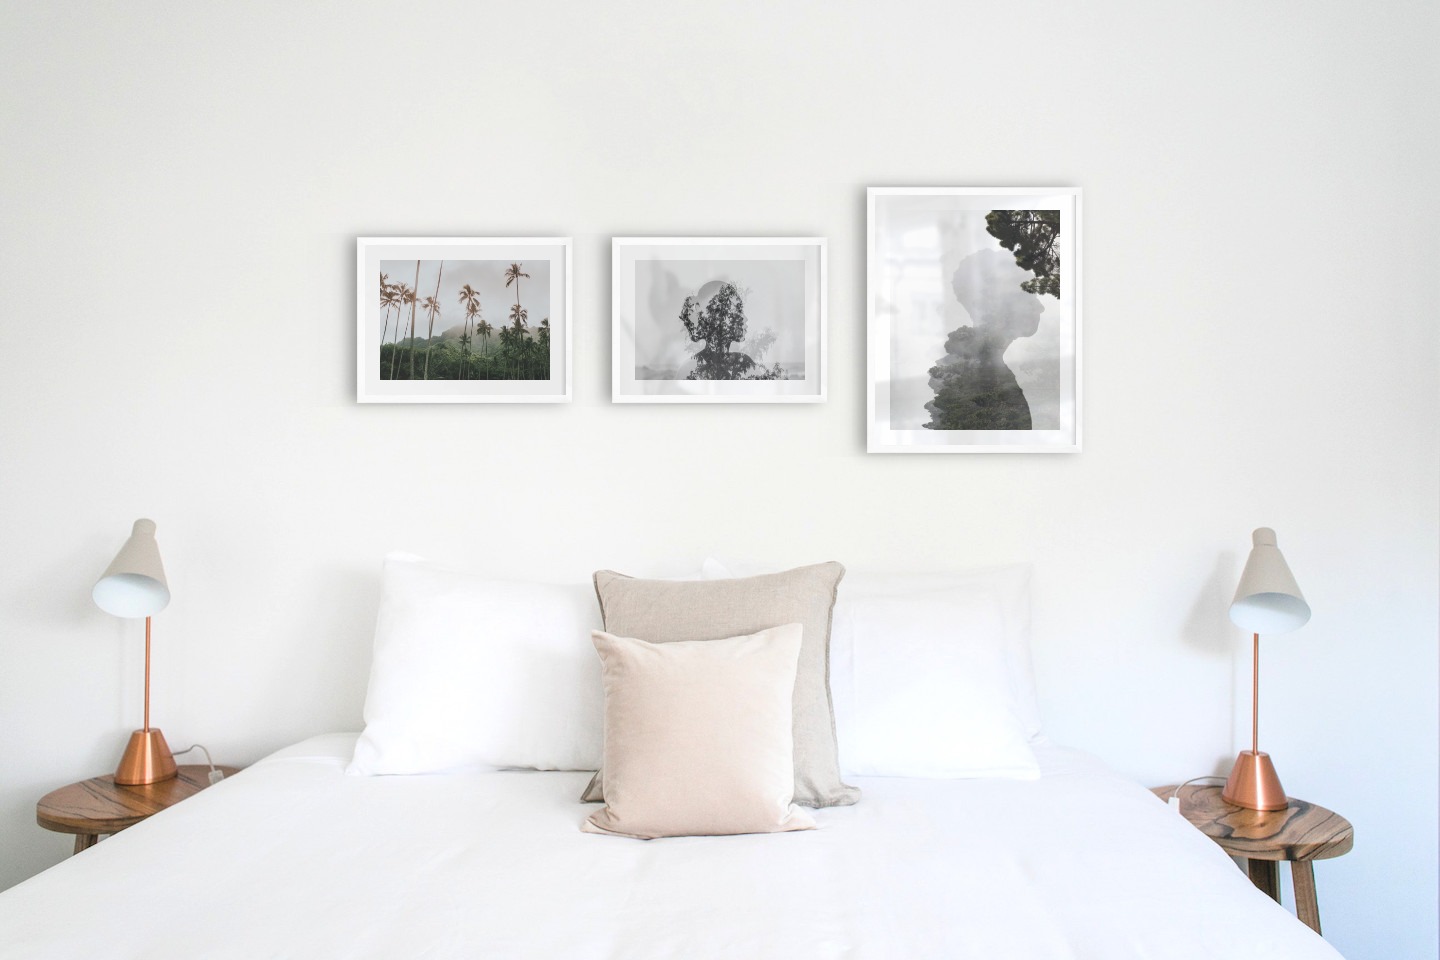 Gallery wall with picture frames in white in sizes 30x40 and 40x50 with prints "Palm trees and mountains", "Trees and silhouette" and "Silhouette and tree"